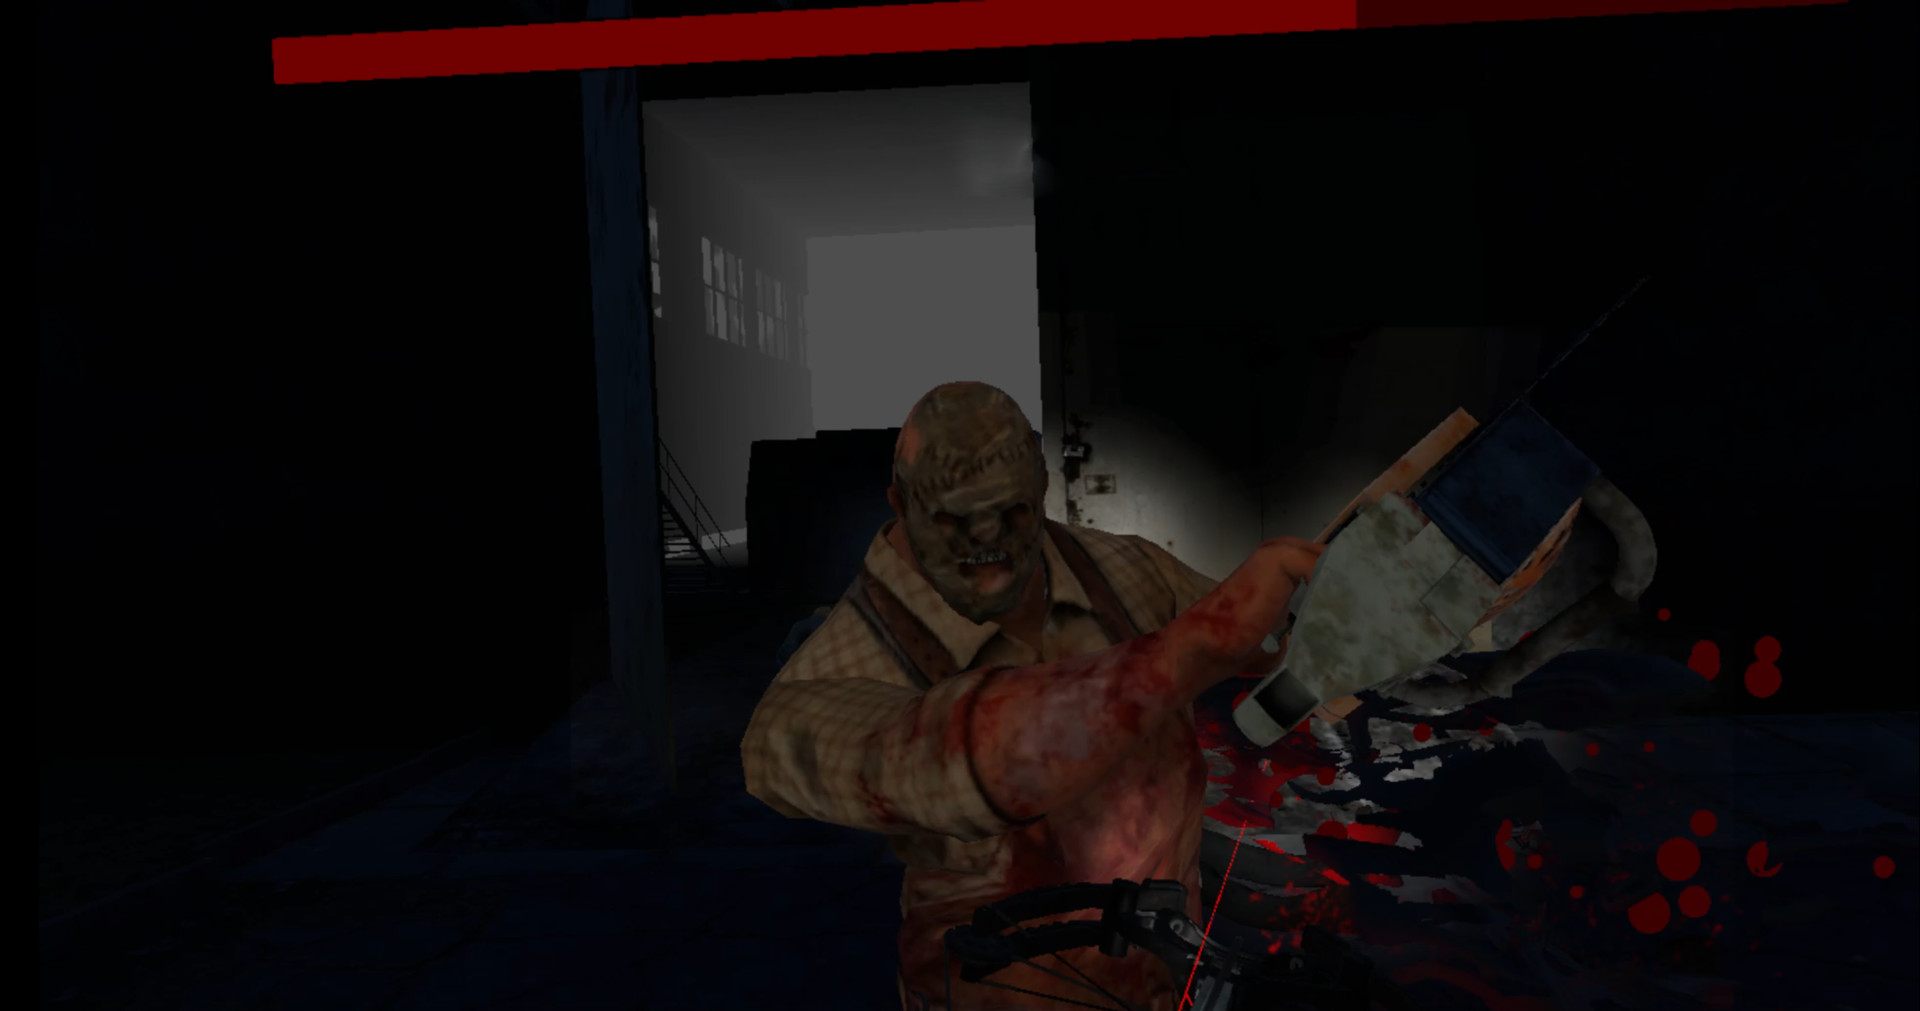 Survive Zombies Free Download